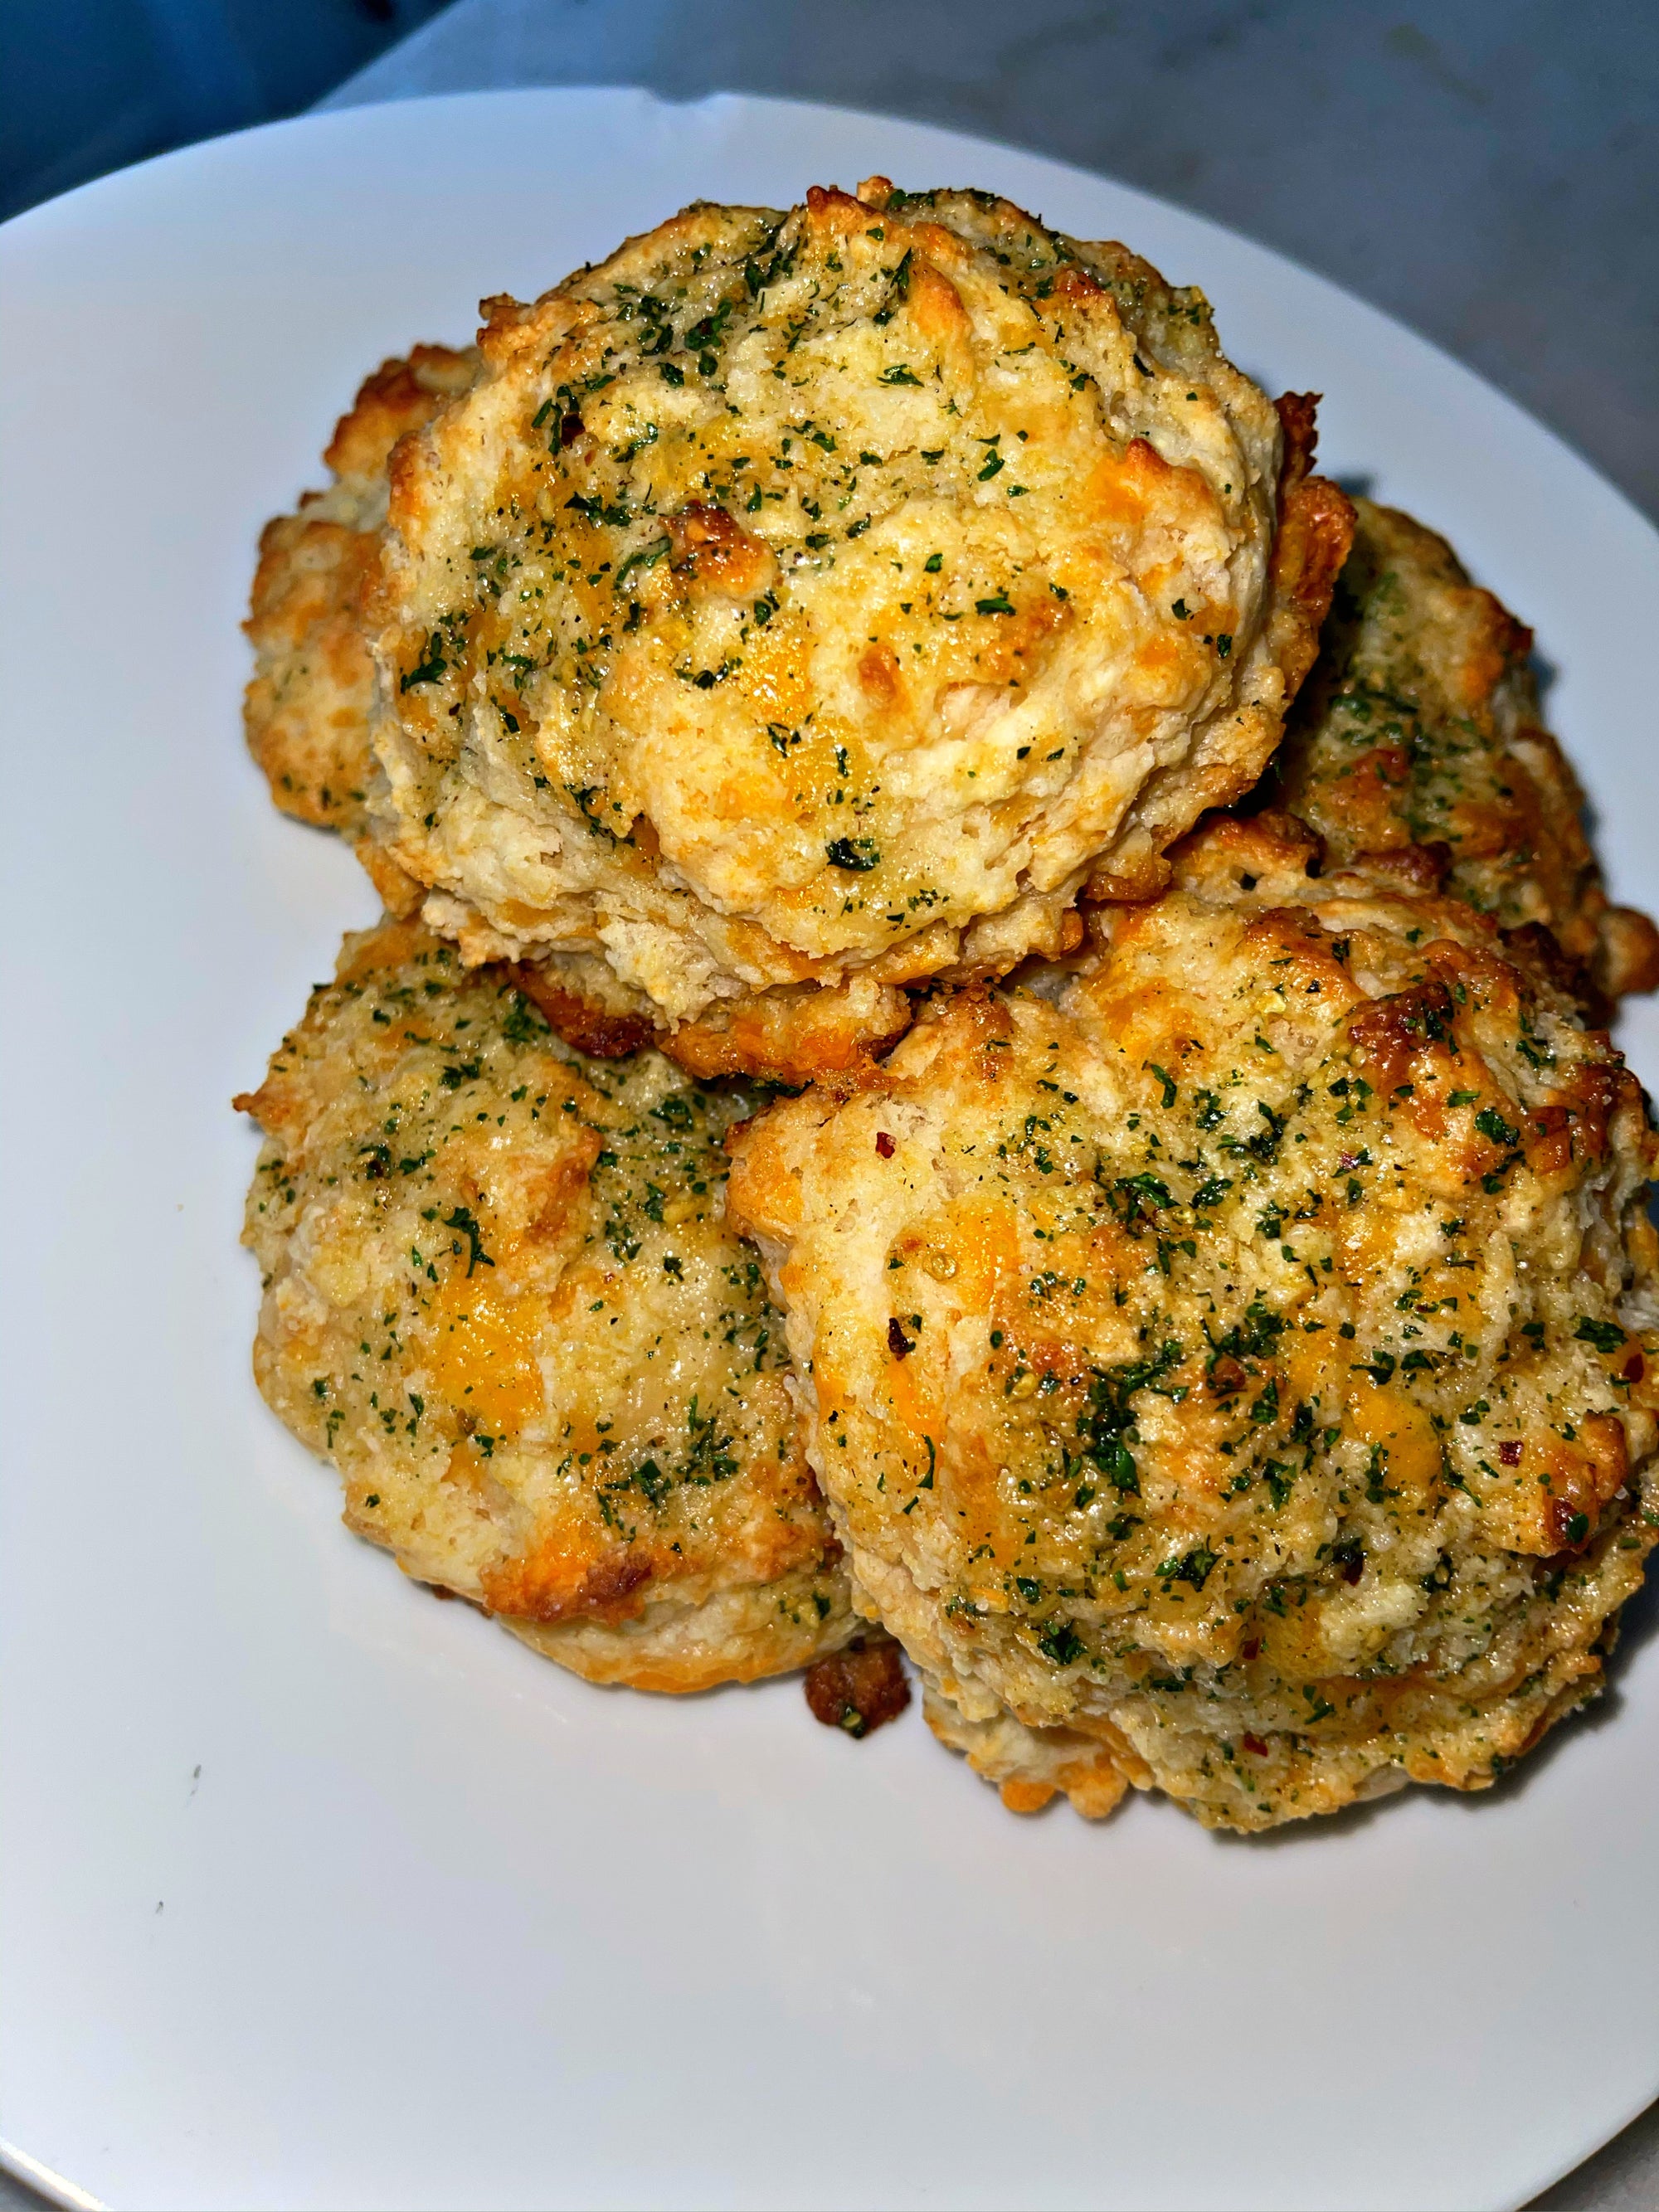 Cheddar and parmesan Biscuits